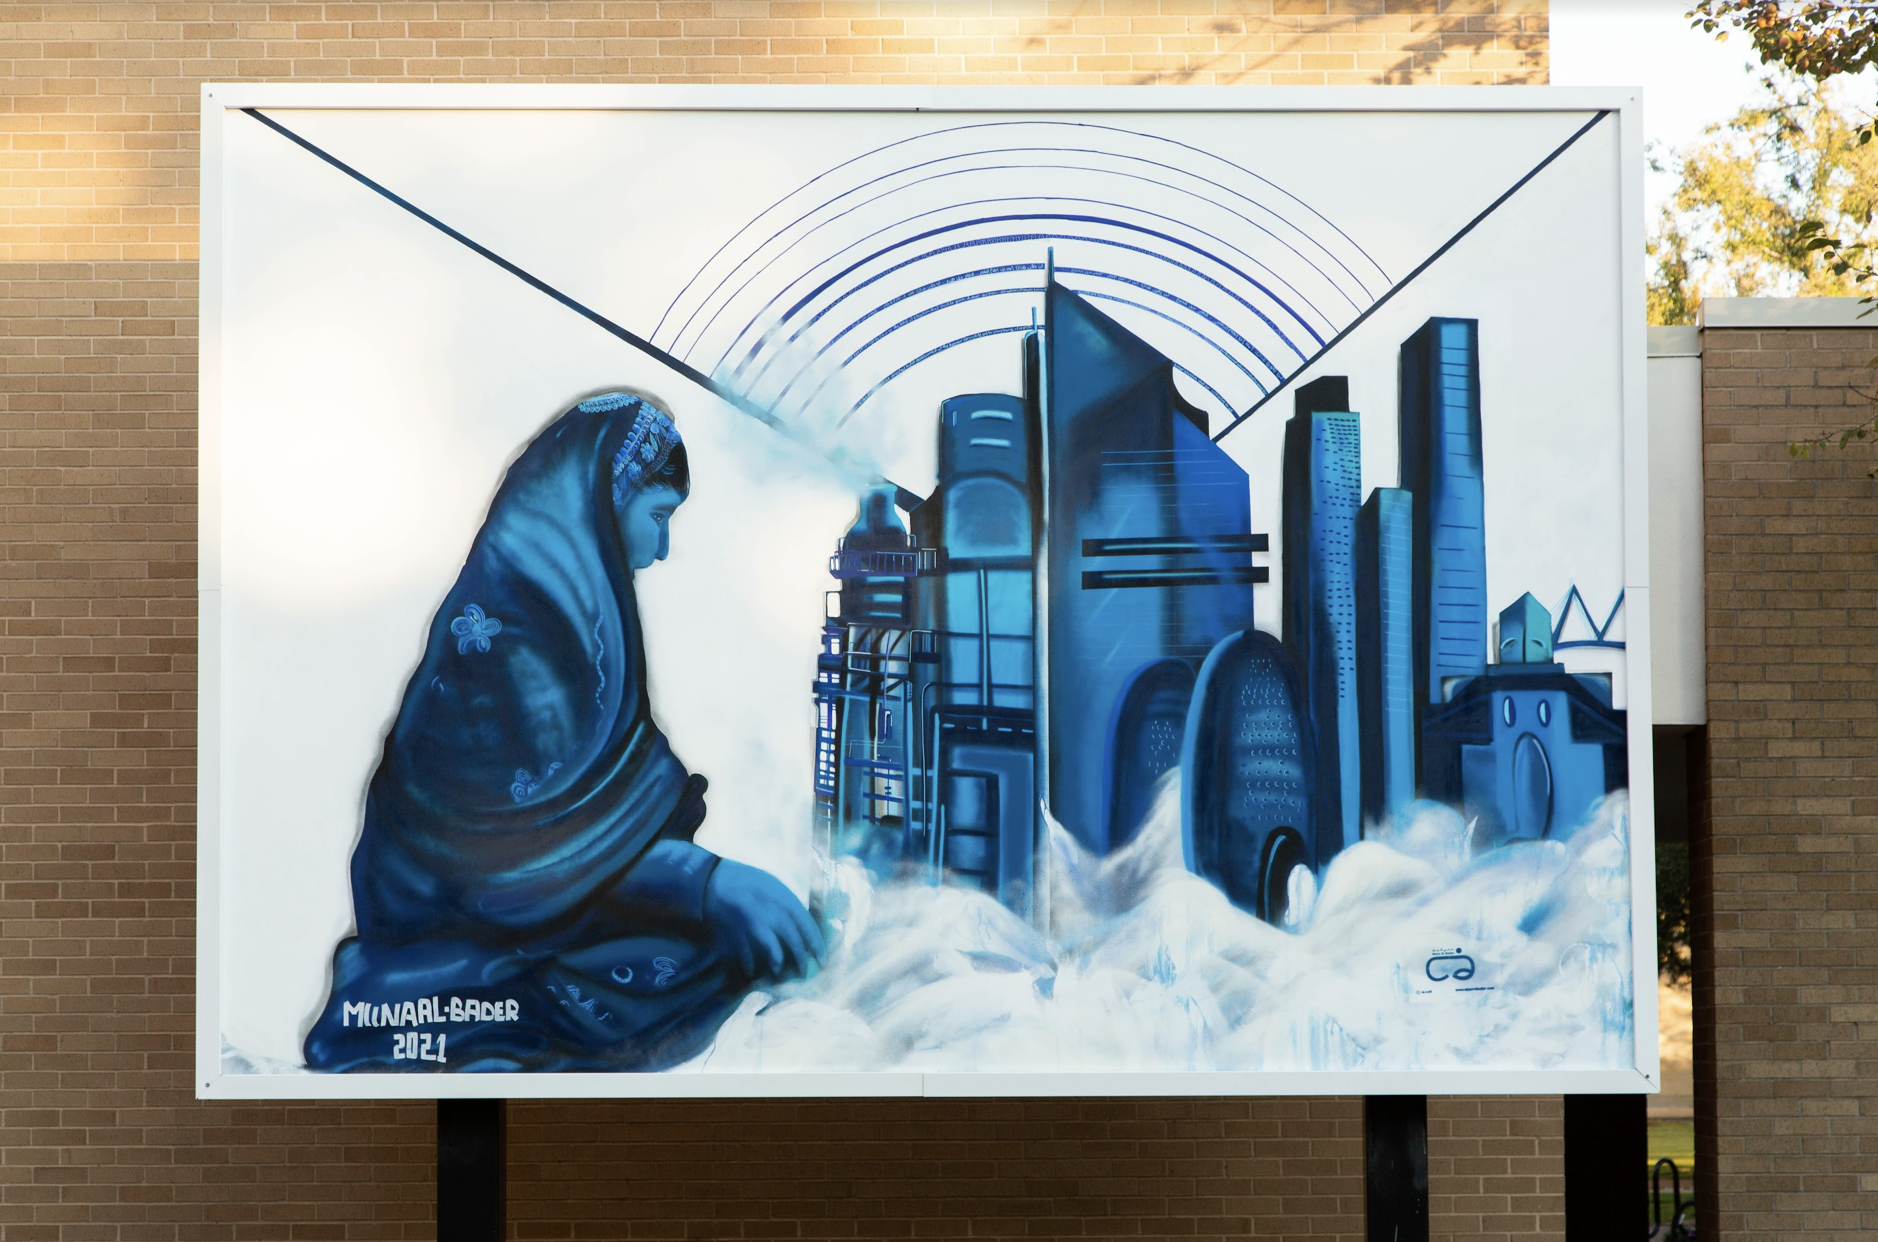 A large scale mural painted in shades of blue on a white background during JEDARIART in Houston.